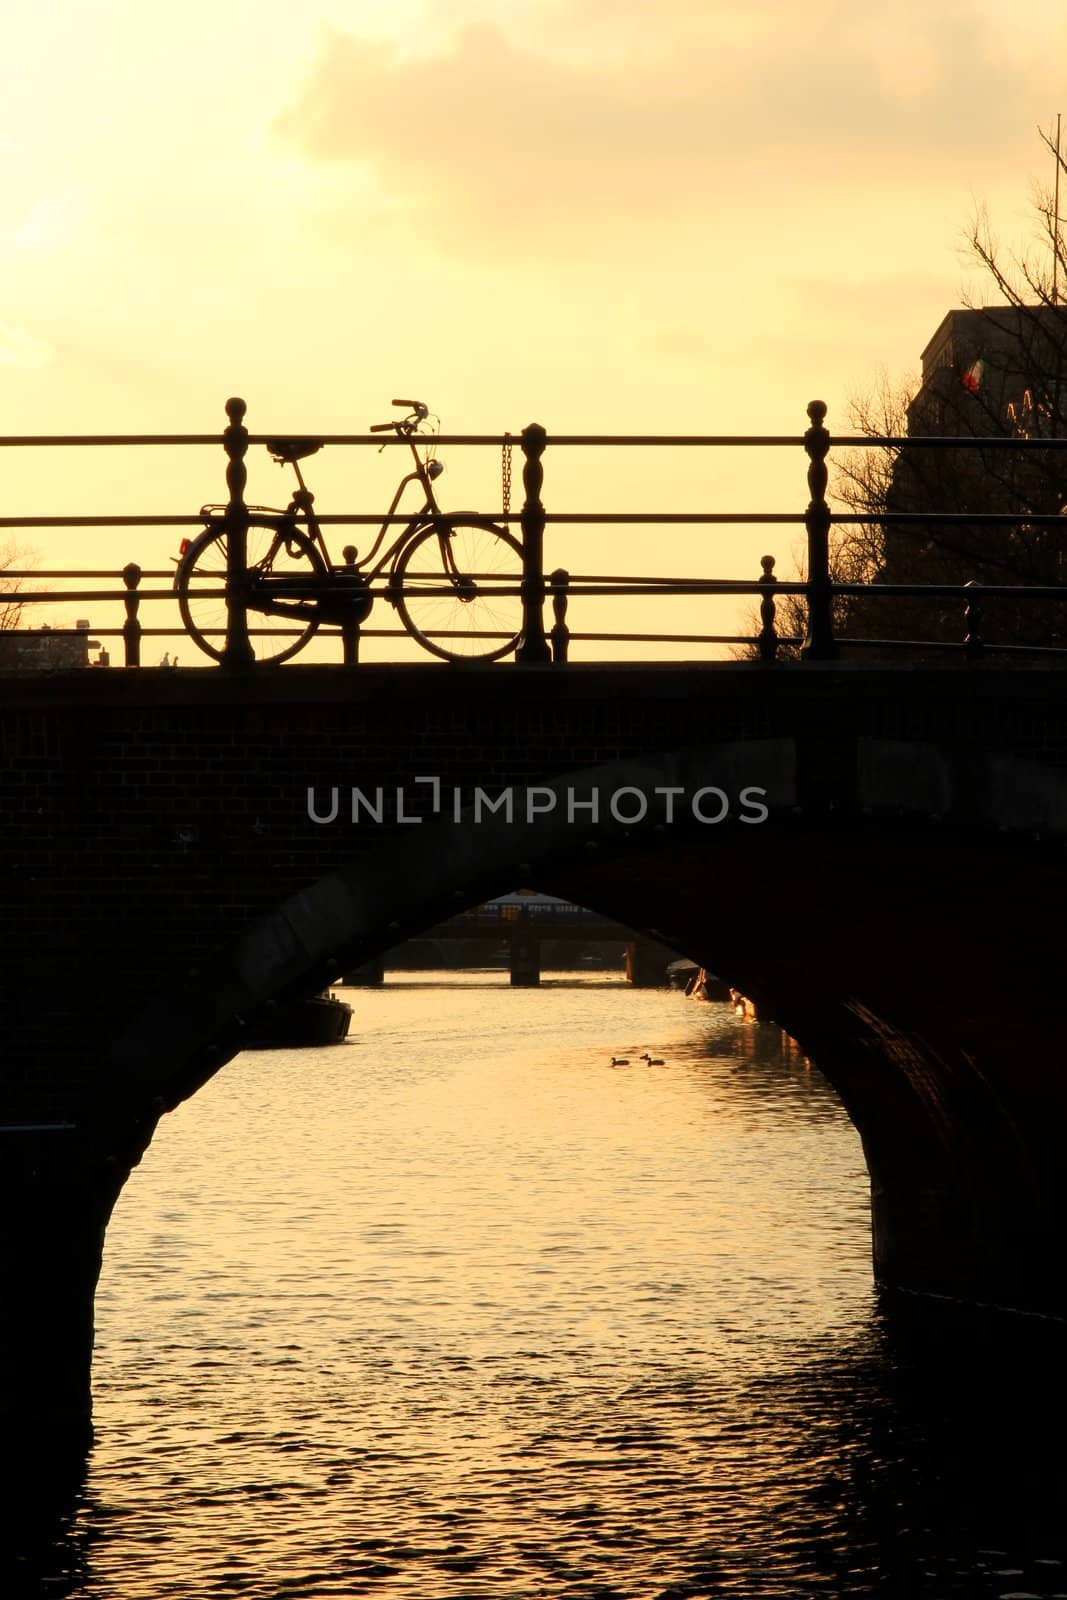 Bicycle Silhouetted on a Bridge over a Canal in the late Afternoon Sun in Amsterdam. Portrait Orientation.